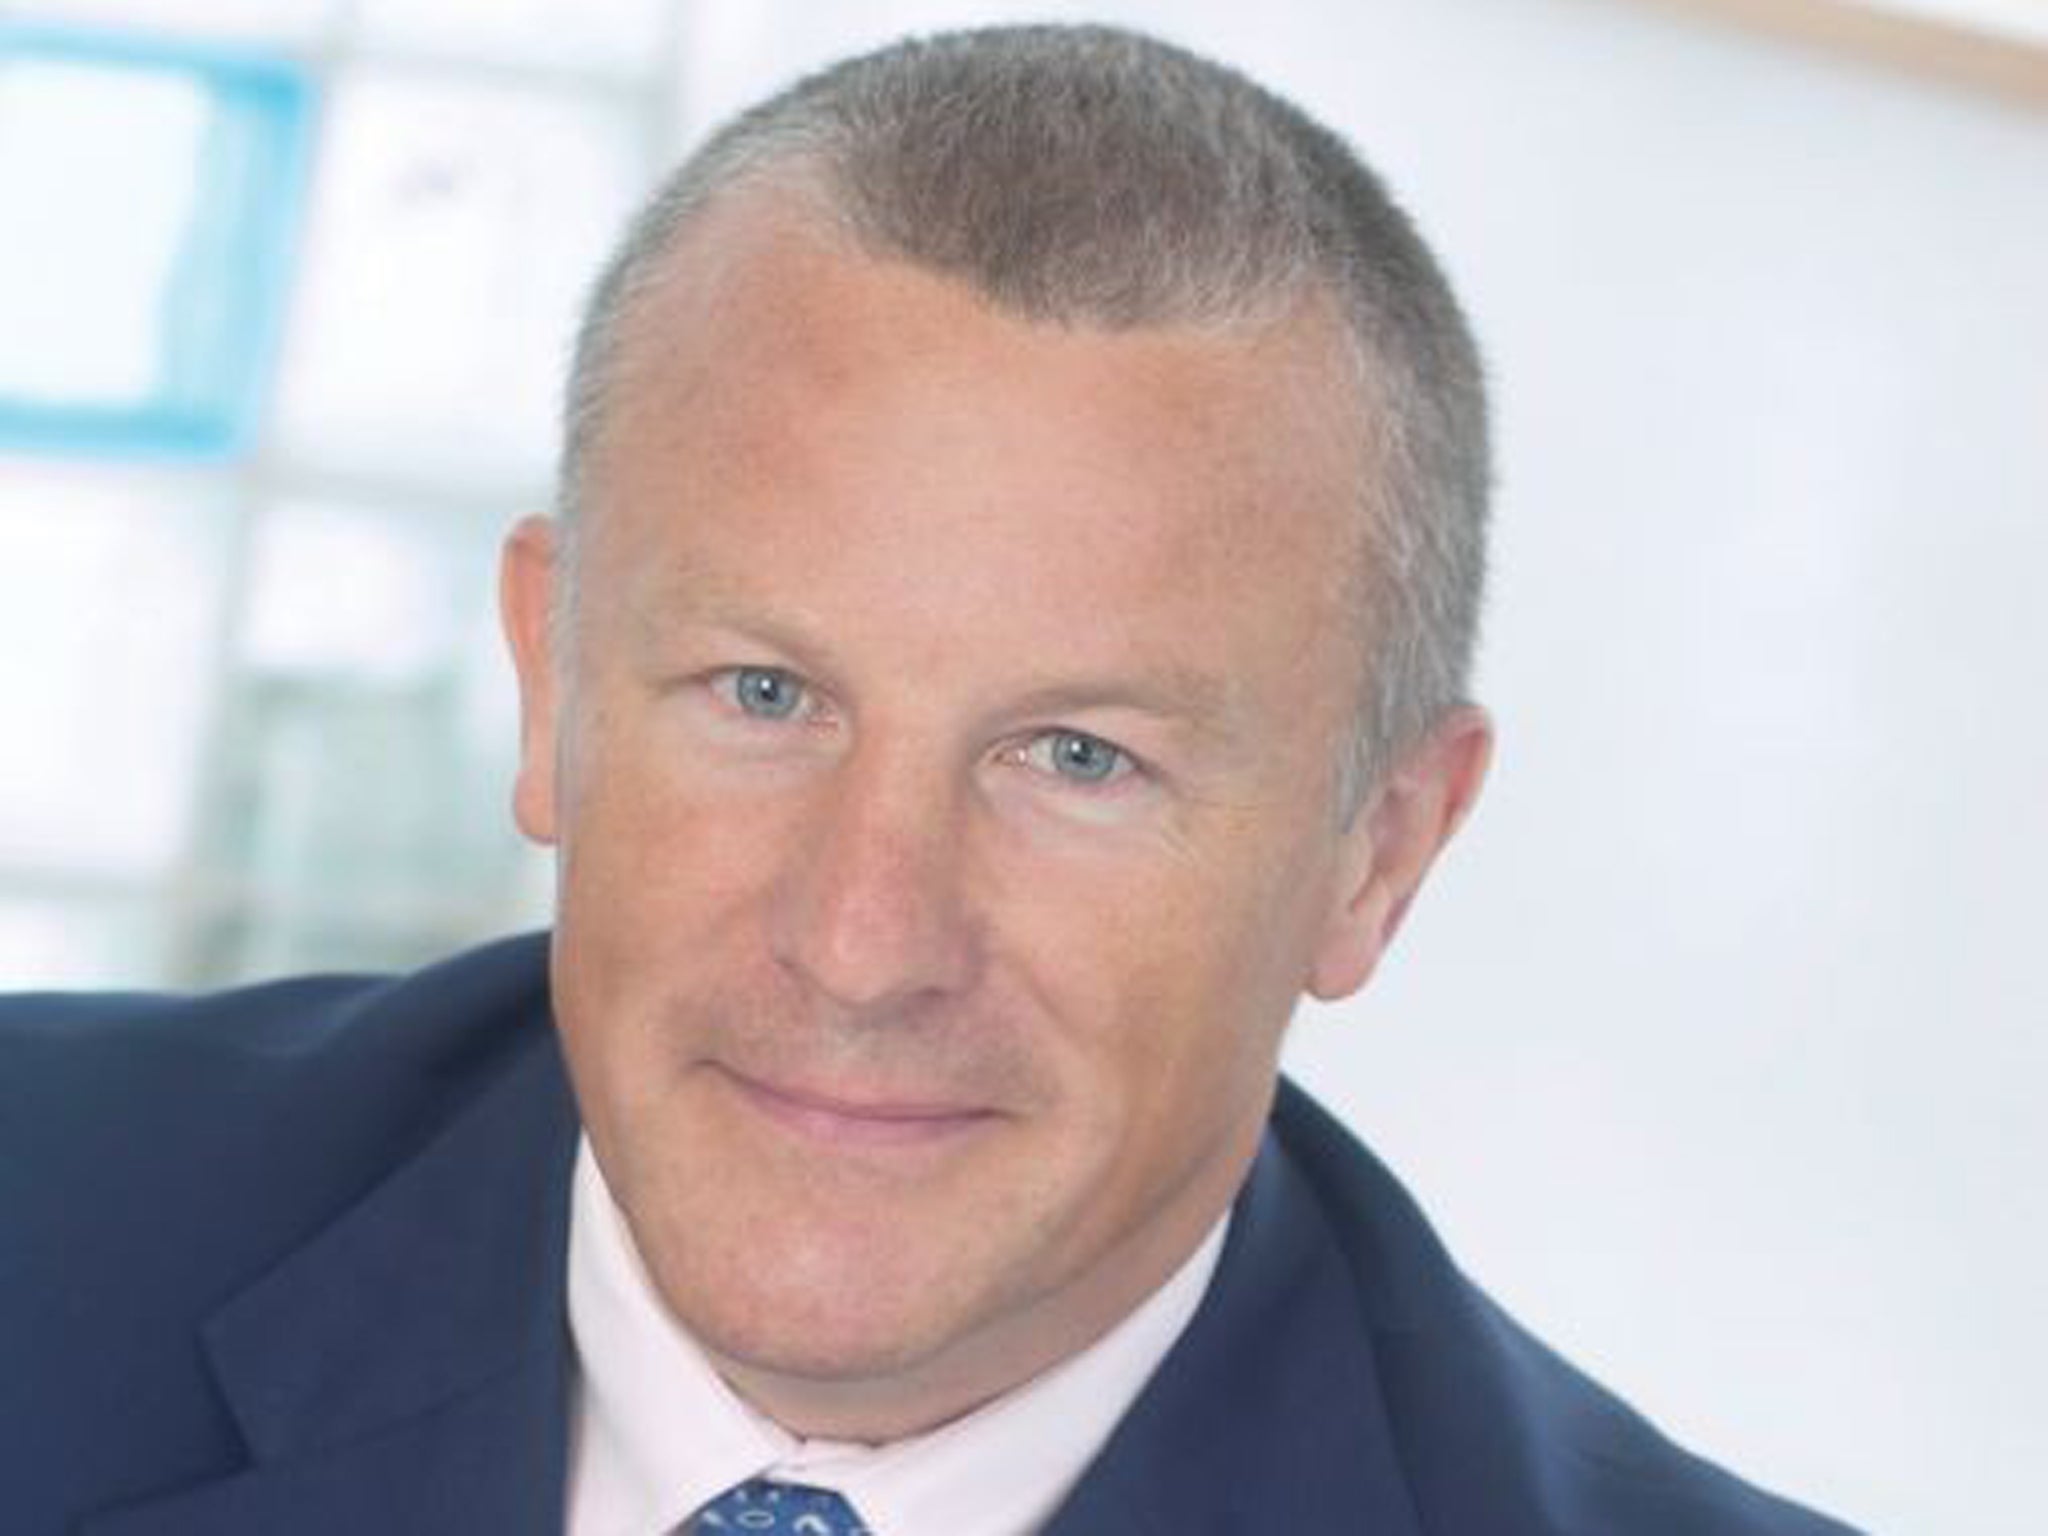 Neil Woodford was the doyen of UK fund managers seemingly able to achieve both investment and income growth